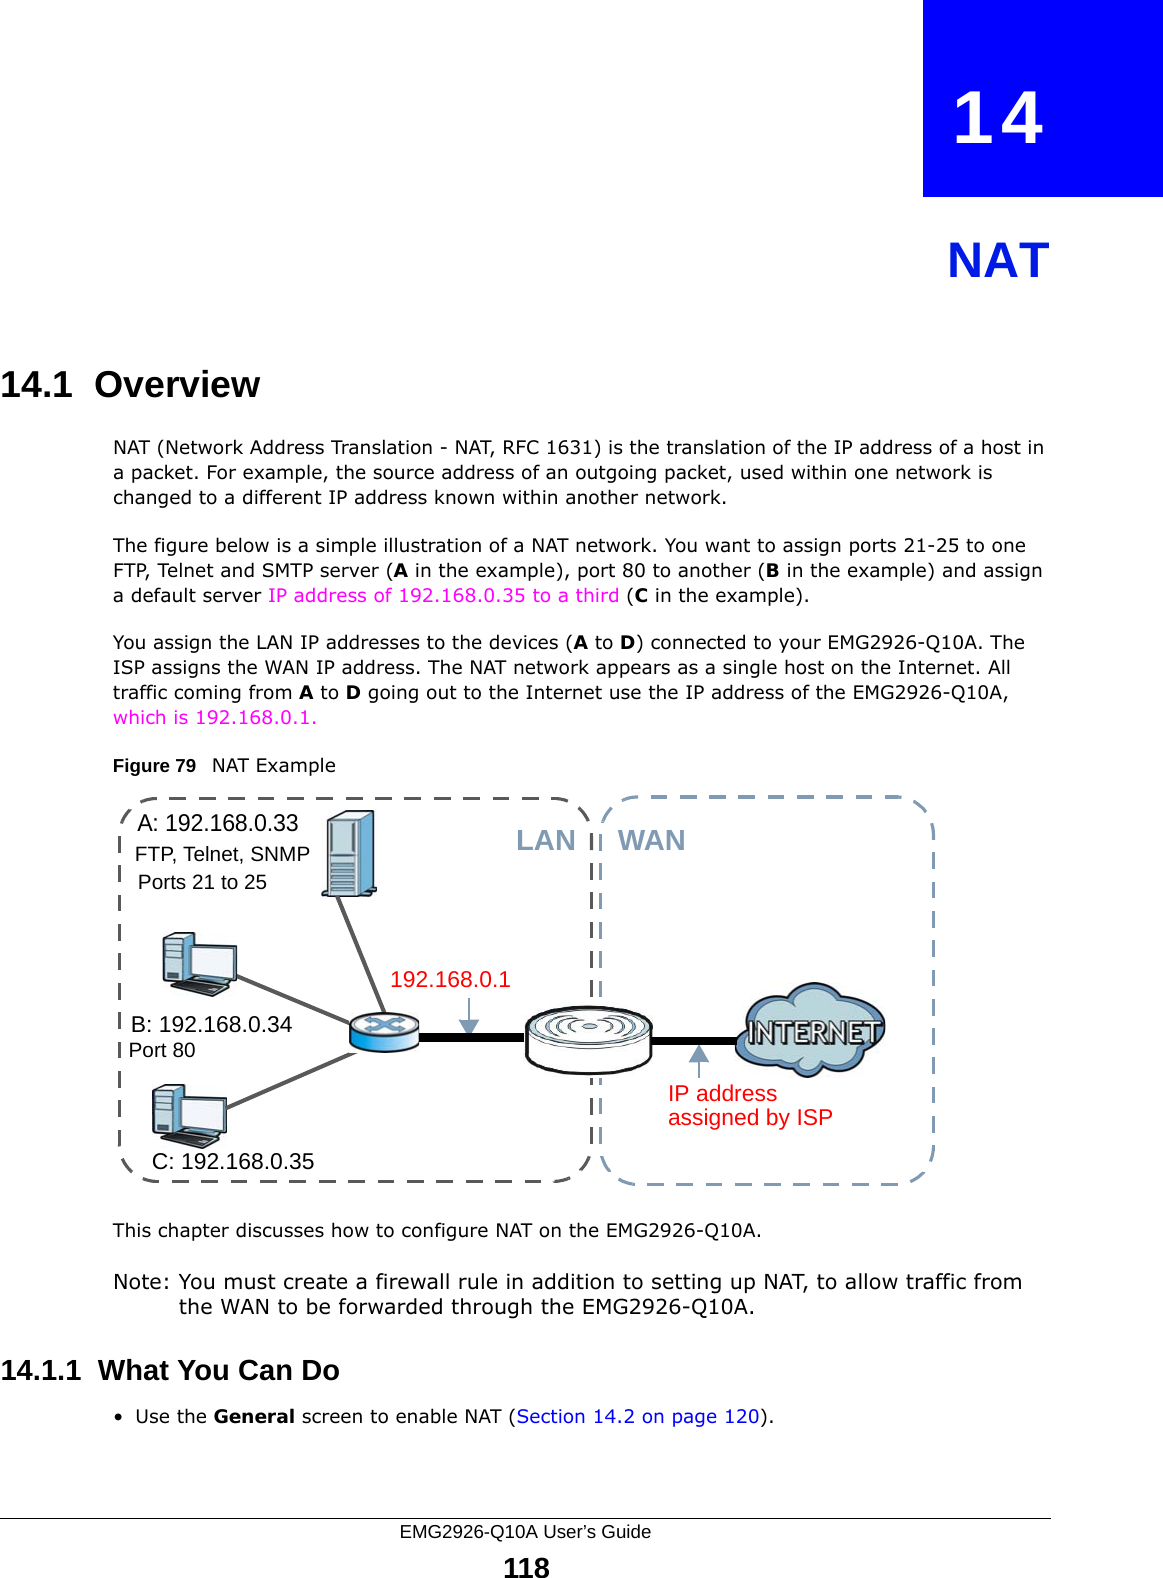 EMG2926-Q10A User’s Guide118CHAPTER   14NAT14.1  Overview   NAT (Network Address Translation - NAT, RFC 1631) is the translation of the IP address of a host in a packet. For example, the source address of an outgoing packet, used within one network is changed to a different IP address known within another network.The figure below is a simple illustration of a NAT network. You want to assign ports 21-25 to one FTP, Telnet and SMTP server (A in the example), port 80 to another (B in the example) and assign a default server IP address of 192.168.0.35 to a third (C in the example). You assign the LAN IP addresses to the devices (A to D) connected to your EMG2926-Q10A. The ISP assigns the WAN IP address. The NAT network appears as a single host on the Internet. All traffic coming from A to D going out to the Internet use the IP address of the EMG2926-Q10A, which is 192.168.0.1.Figure 79   NAT ExampleThis chapter discusses how to configure NAT on the EMG2926-Q10A.Note: You must create a firewall rule in addition to setting up NAT, to allow traffic from the WAN to be forwarded through the EMG2926-Q10A.14.1.1  What You Can Do•Use the General screen to enable NAT (Section 14.2 on page 120).A: 192.168.0.33B: 192.168.0.34C: 192.168.0.35IP address 192.168.0.1WANLANassigned by ISPFTP, Telnet, SNMPPort 80Ports 21 to 25